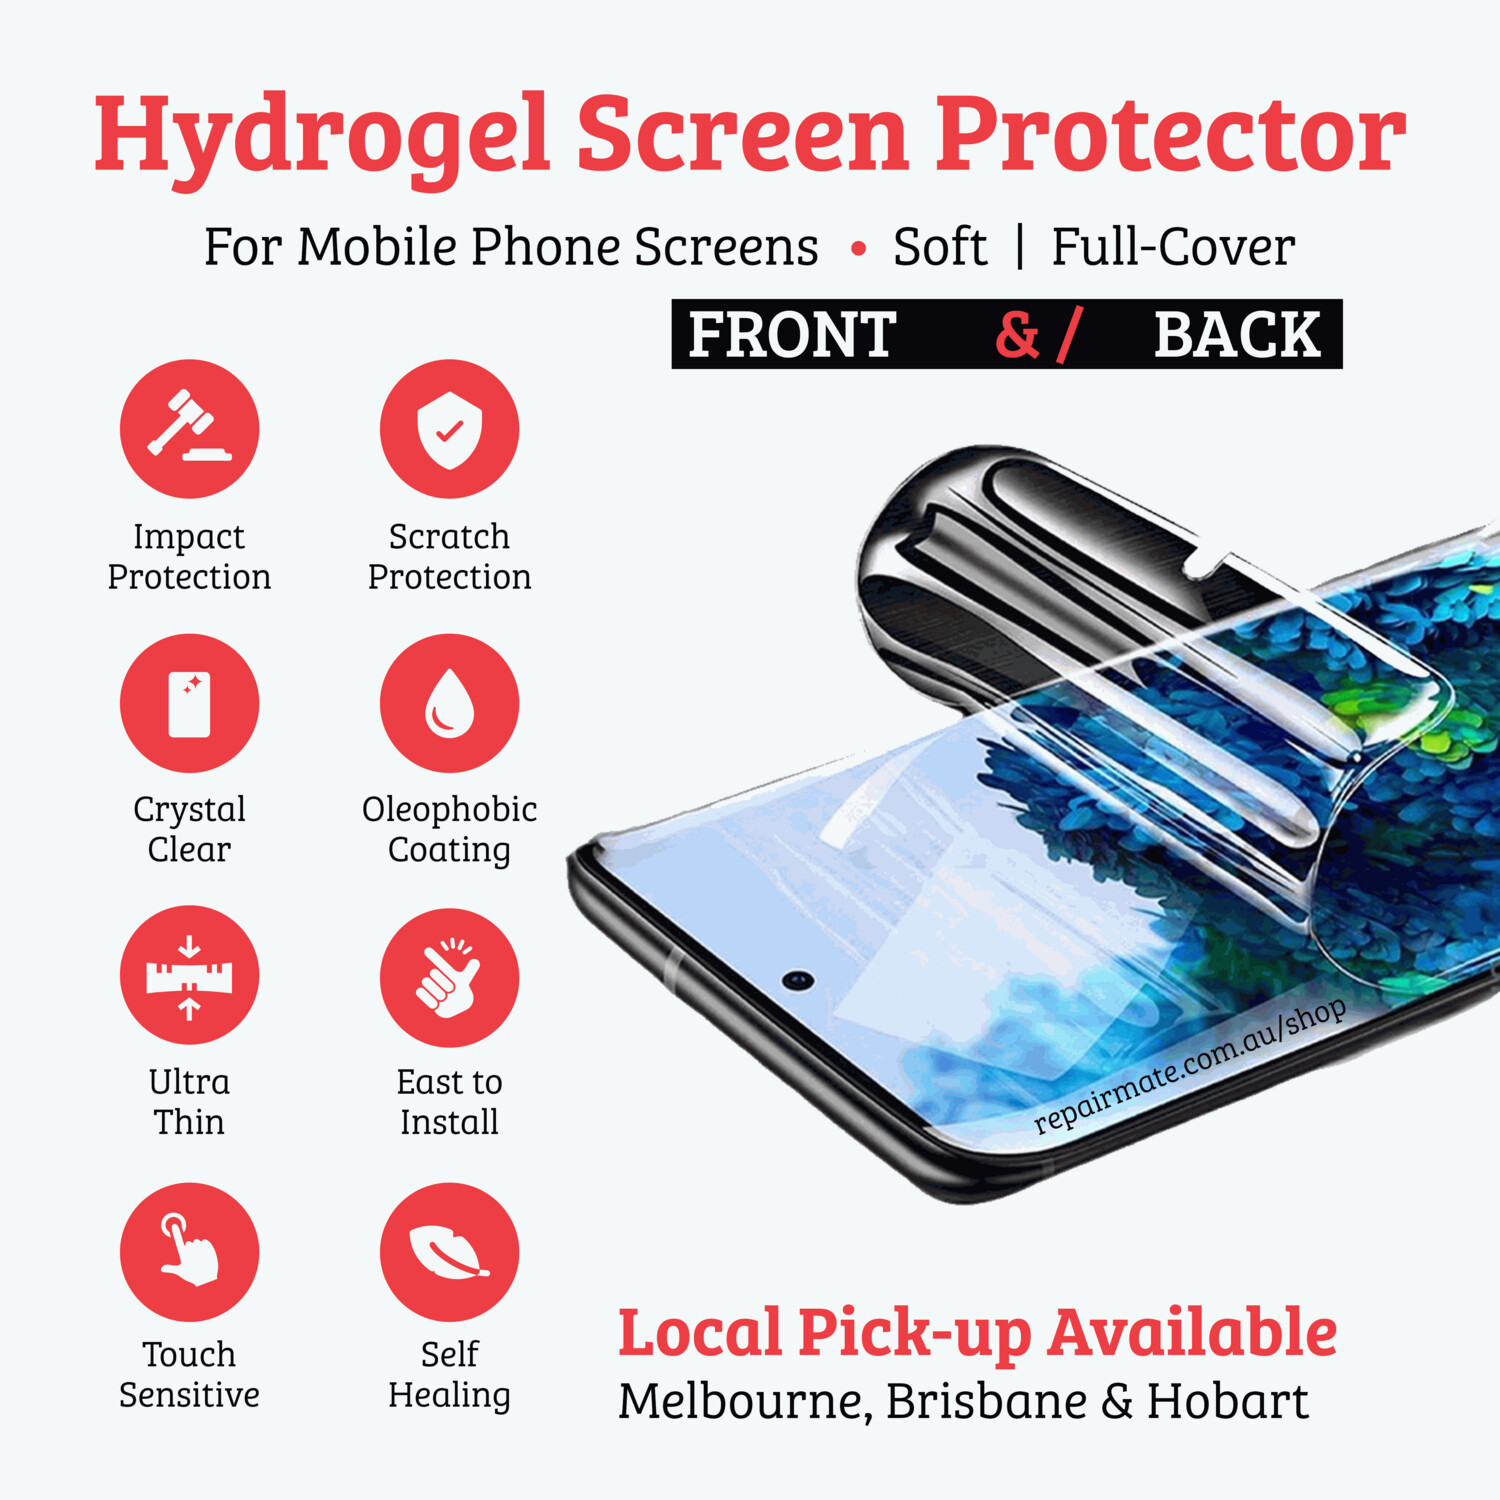 Samsung Galaxy Note 9 Premium Hydrogel Screen Protector [2 Pack]